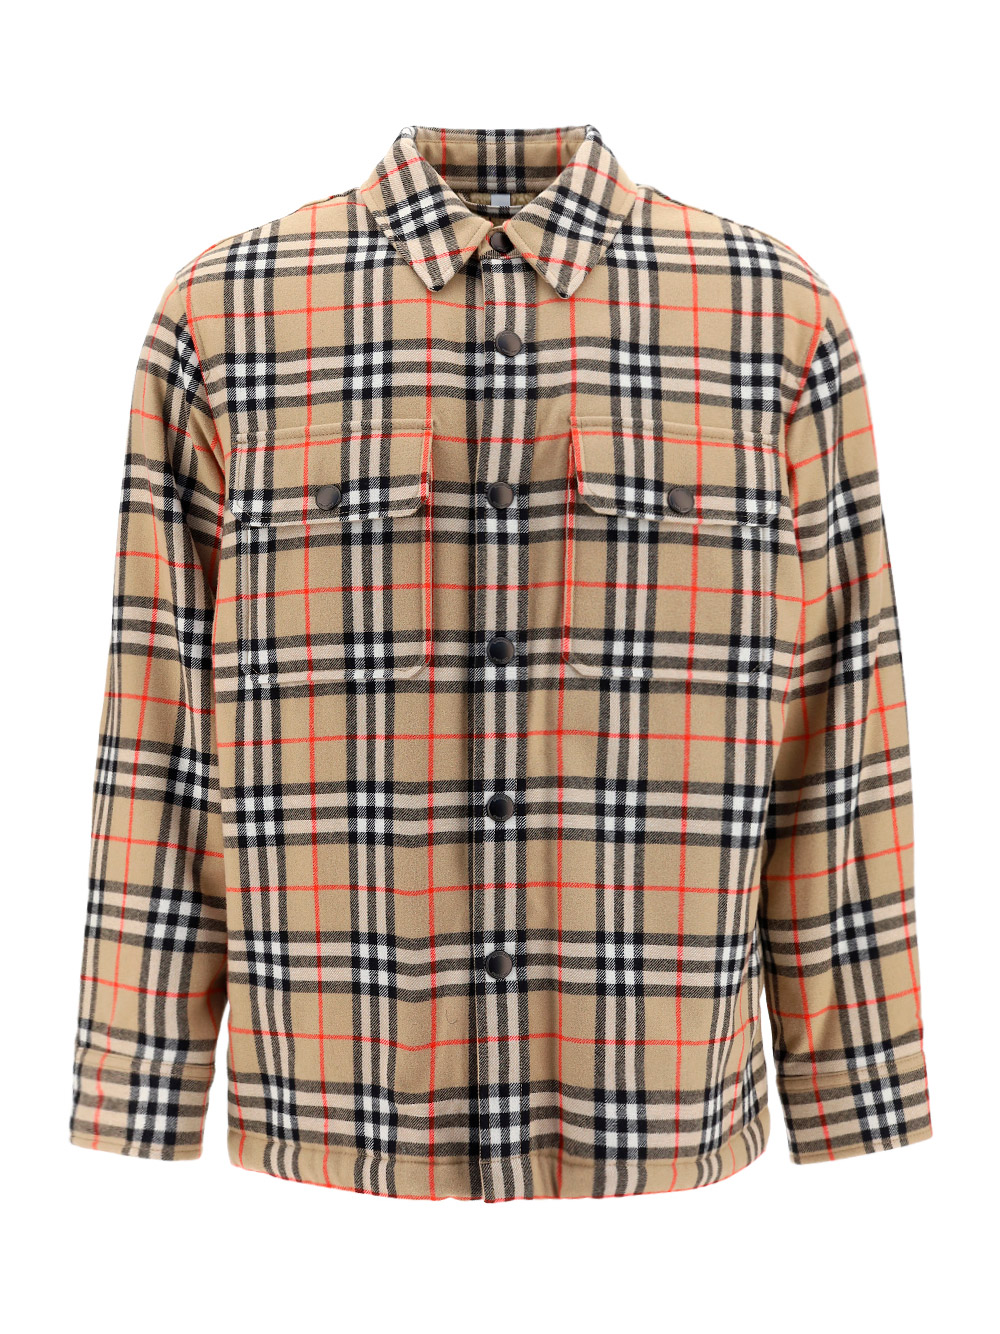 Burberry Vintage Checked Shirt Jacket In Archive Beige Ip Chk